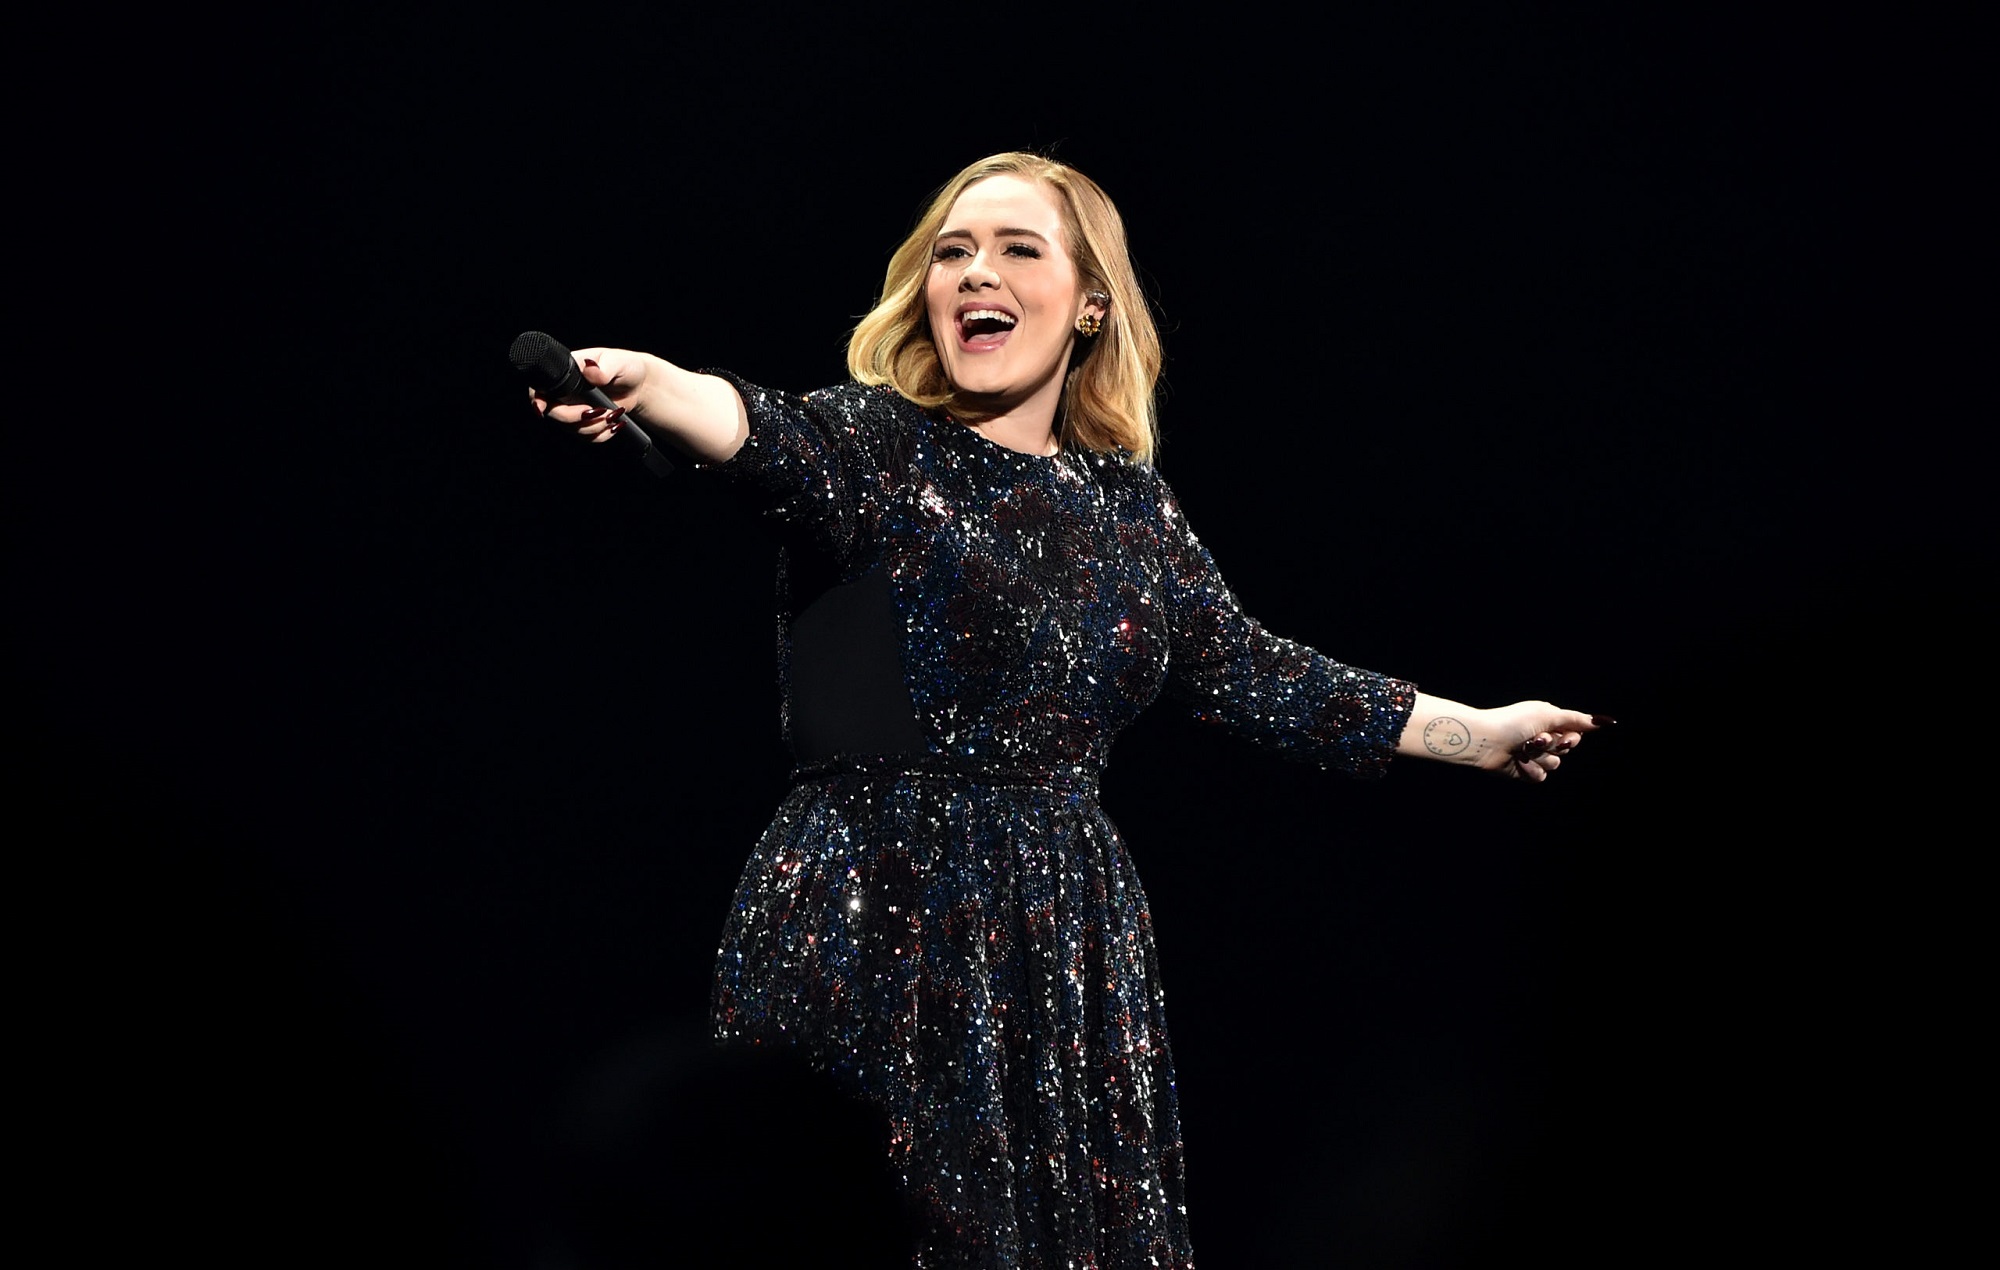 adele-may-tour-again-after-dramatically-losing-45-kg-of-weight-5